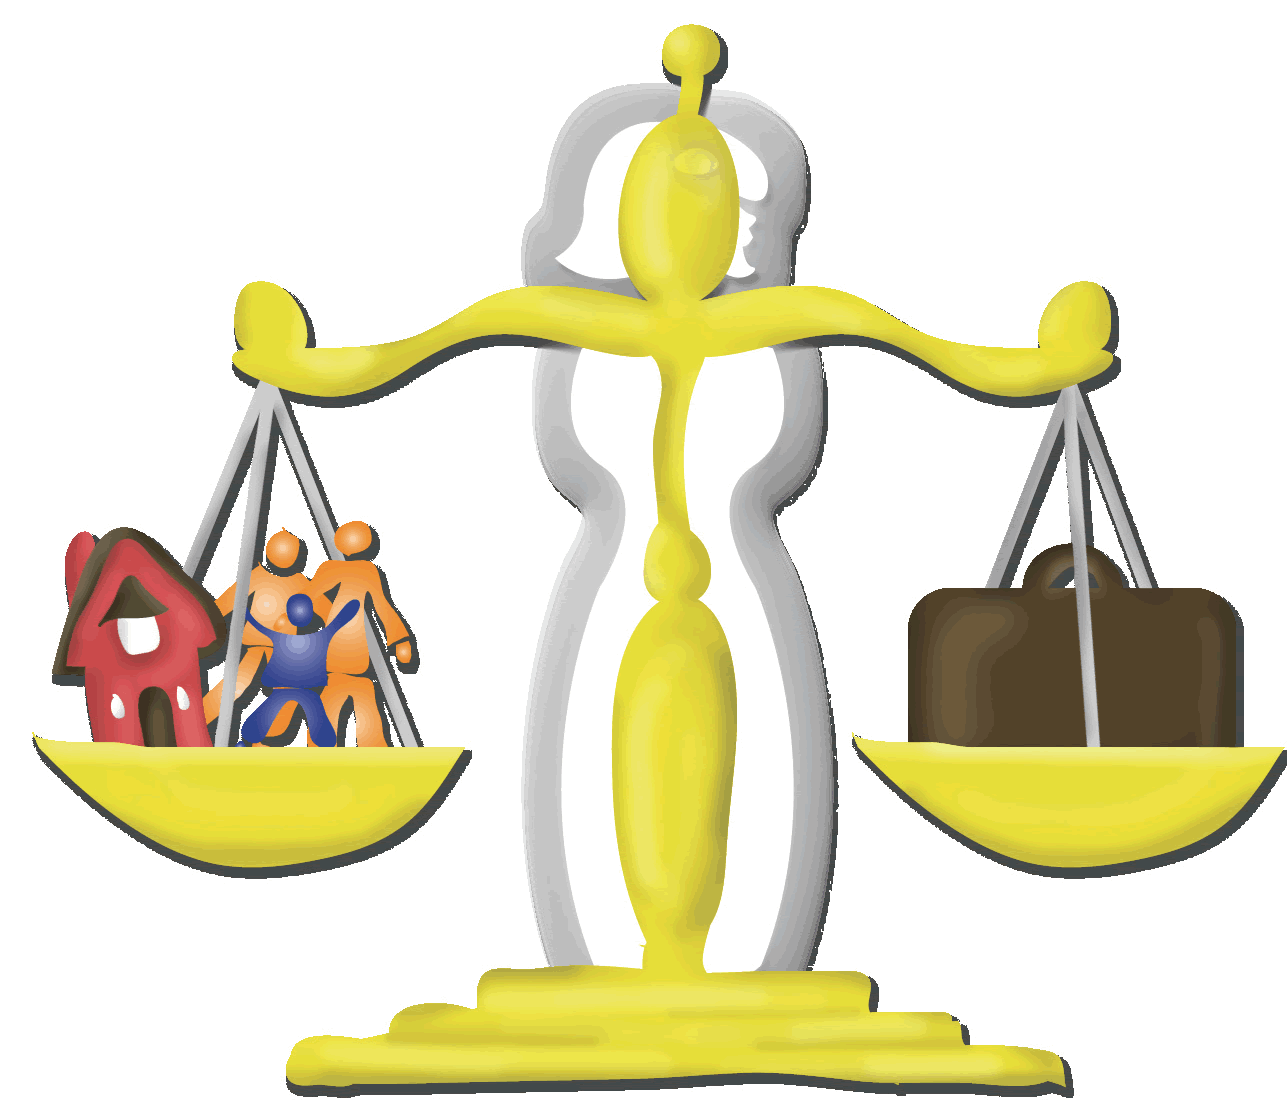 Terminology image of scales. Laws clipart legal system